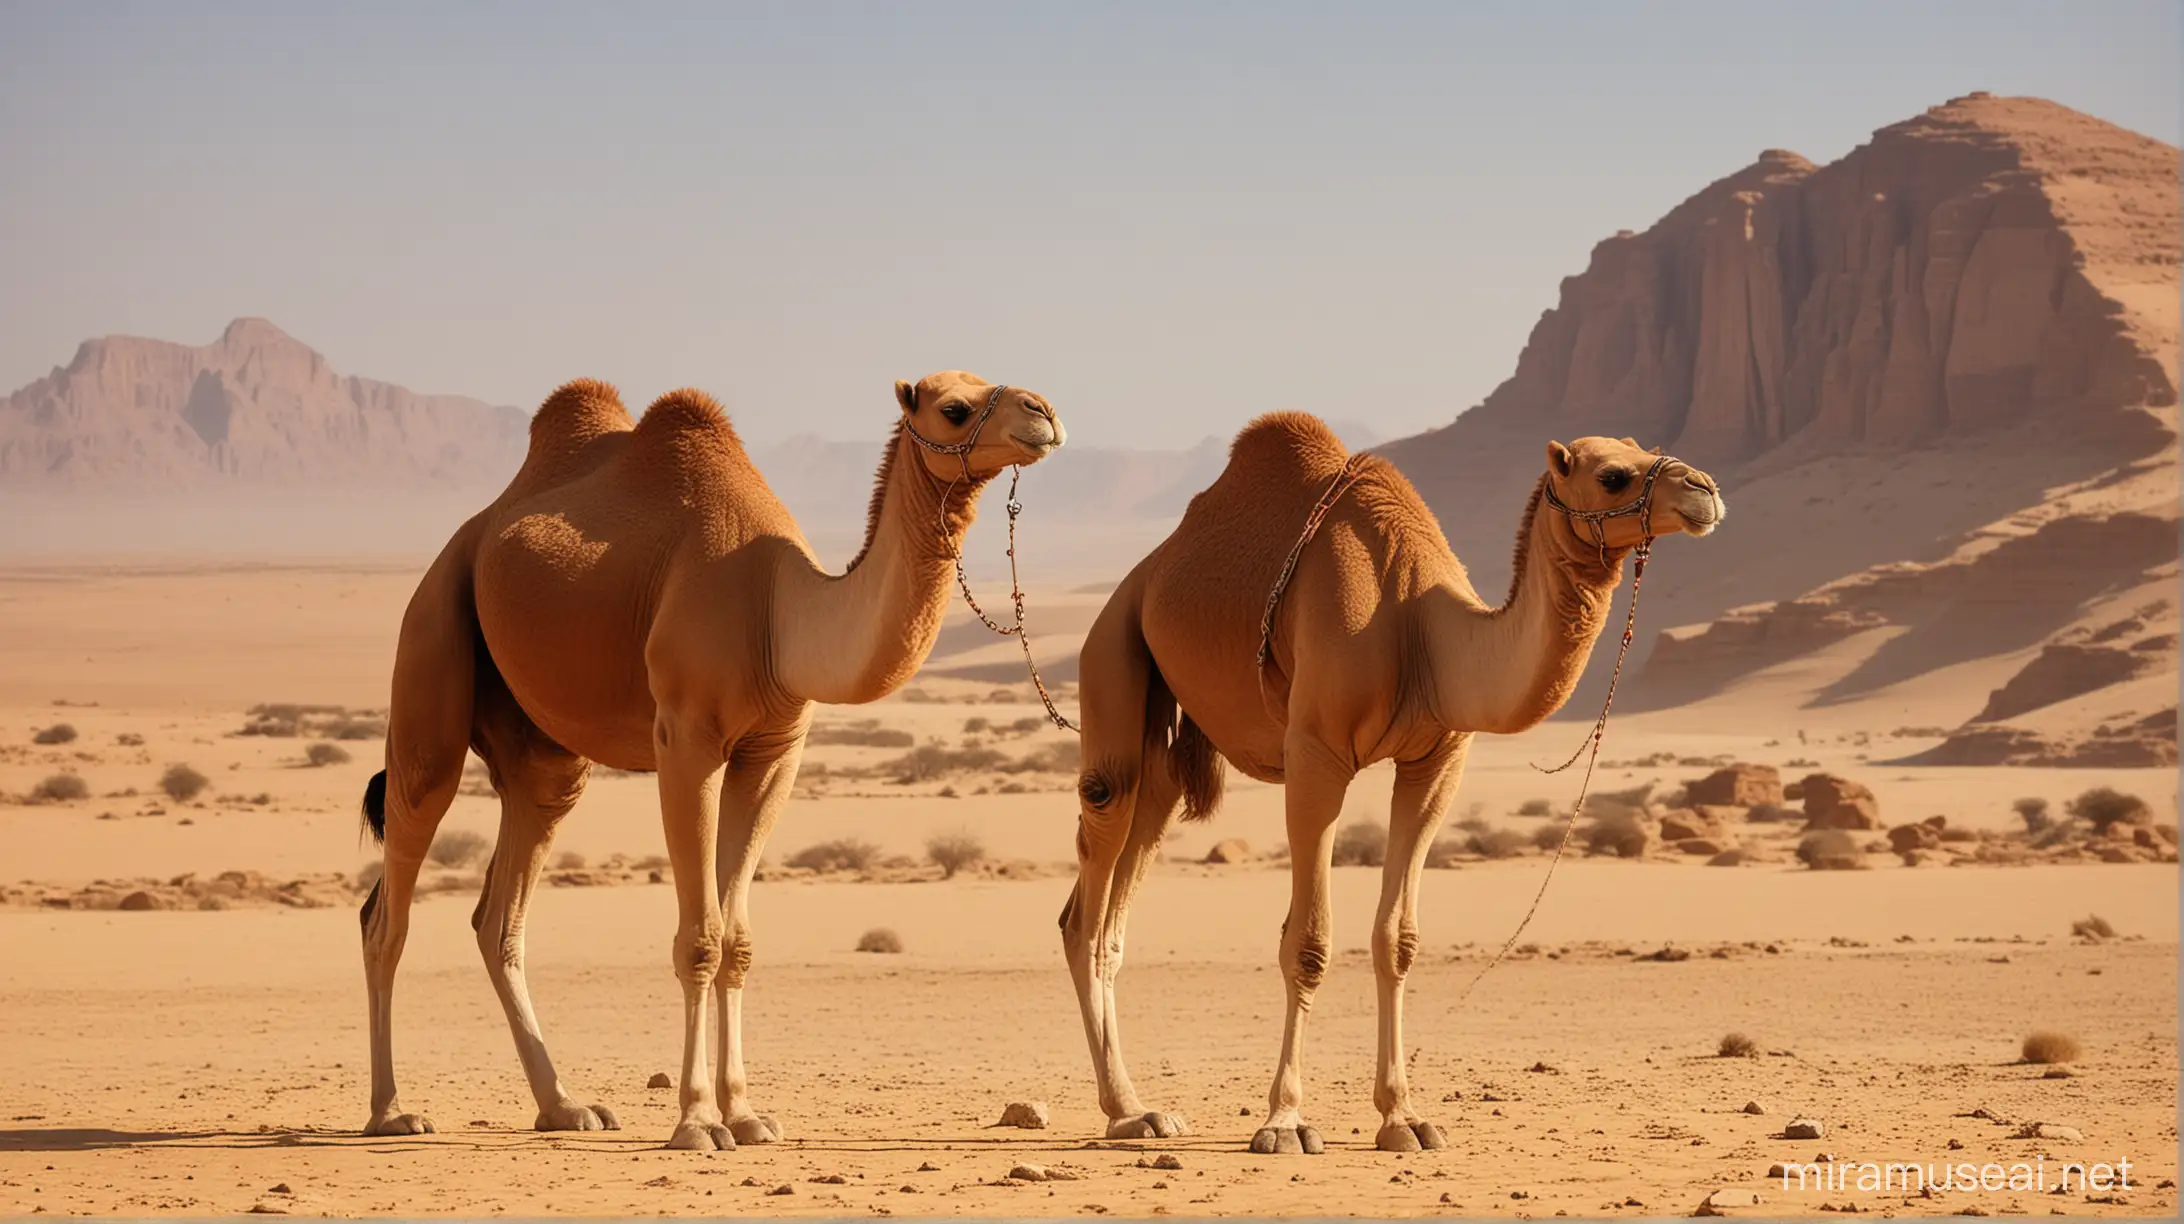 The miraculous she-camel: This image could feature the she-camel standing proudly in a desert landscape. It should be a beautiful and majestic creature, with an otherworldly aura to signify its miraculous nature. The Thamud people could be shown in the background, interacting with the she-camel, possibly sharing resources with it.